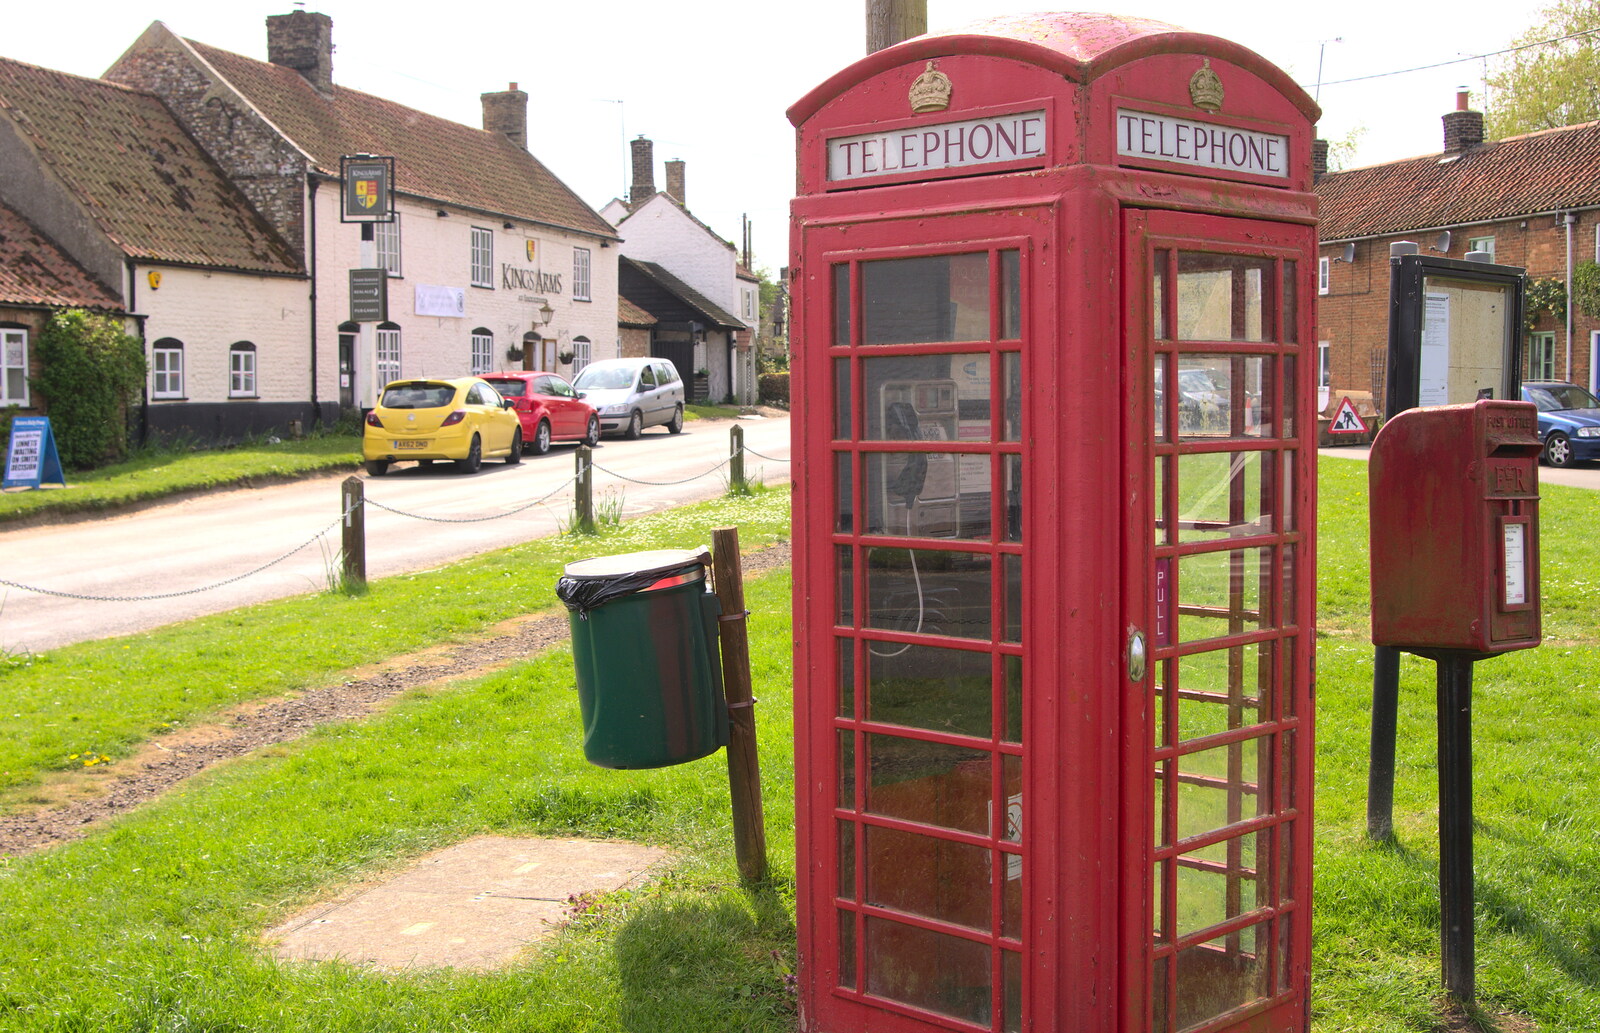 The Kings Arms, Shouldham, and a K6 phone box from The BSCC Cycling Weekender, Outwell, West Norfolk - 7th May 2016